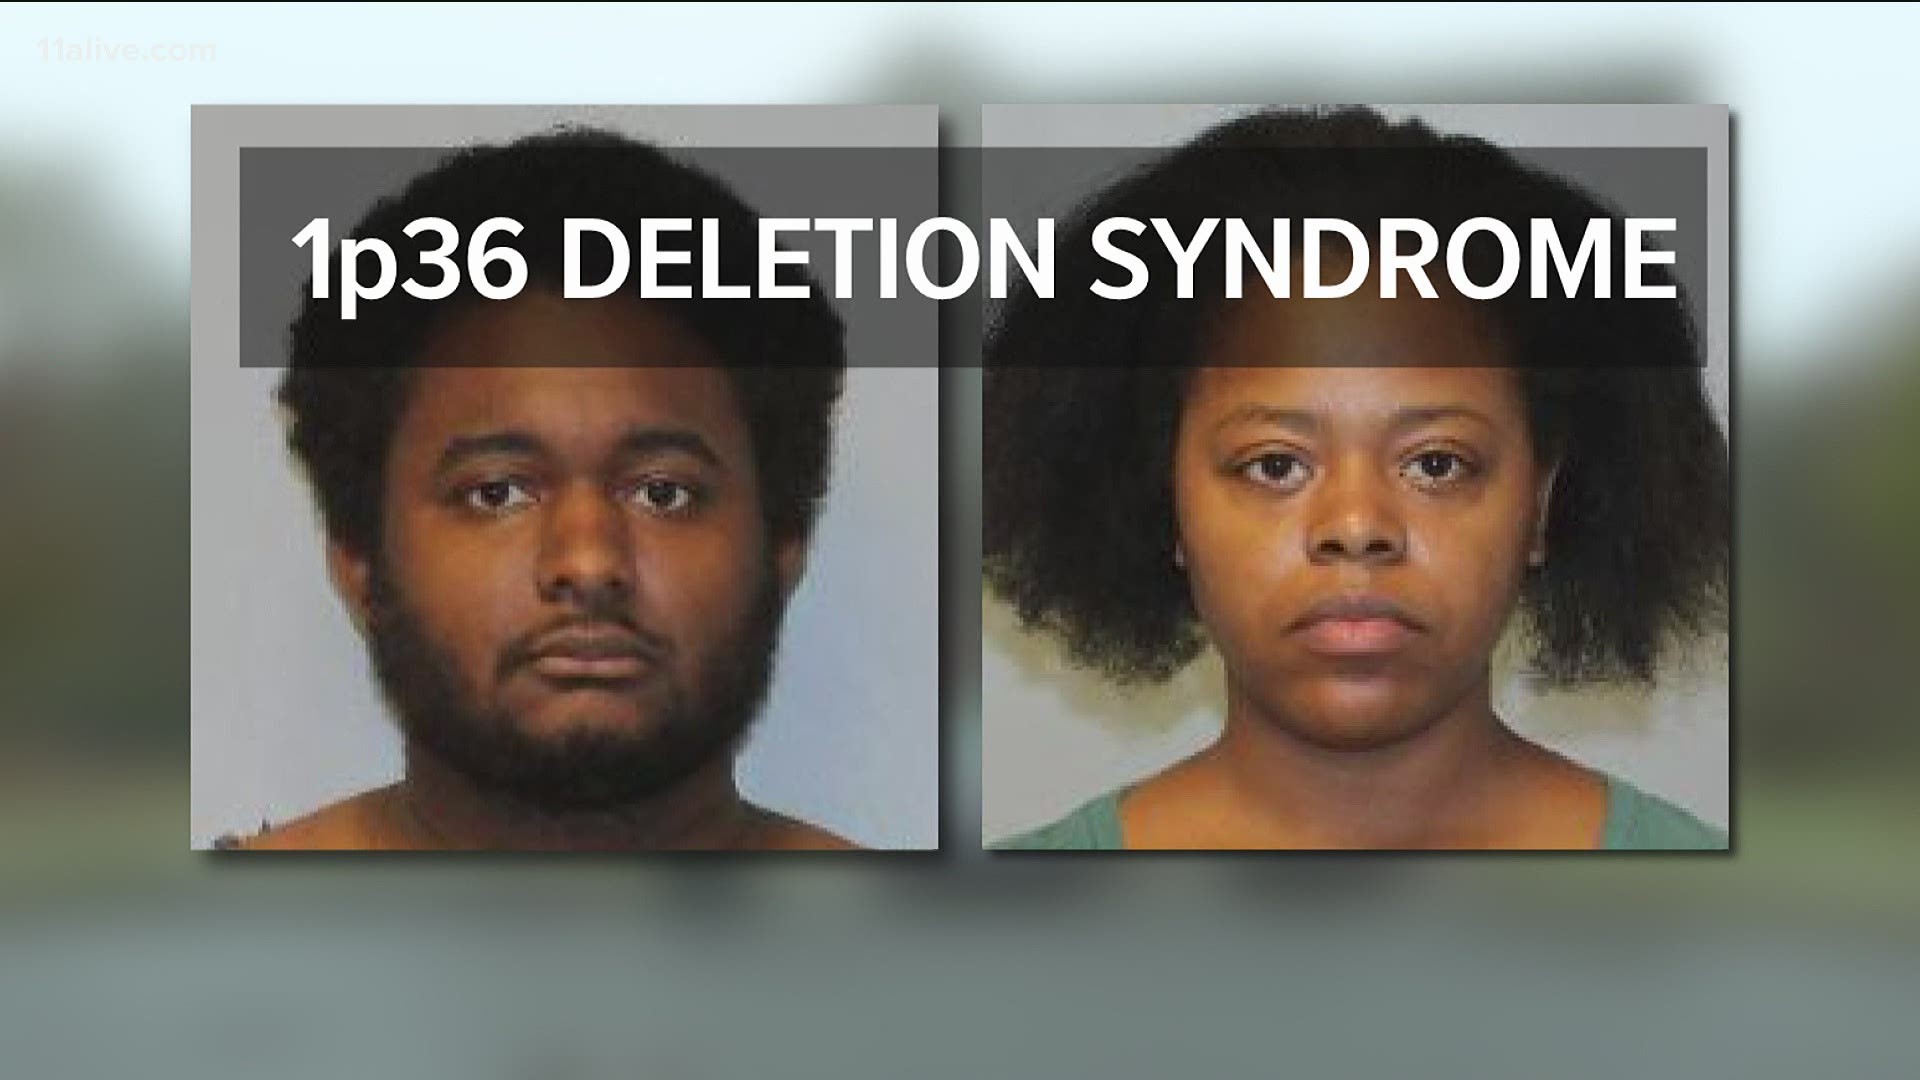 The attorney for Jerrail and Porscha Mickens told 11Alive on Friday the 5-year-old girl suffered from a rare chromosome disorder that led to her death.